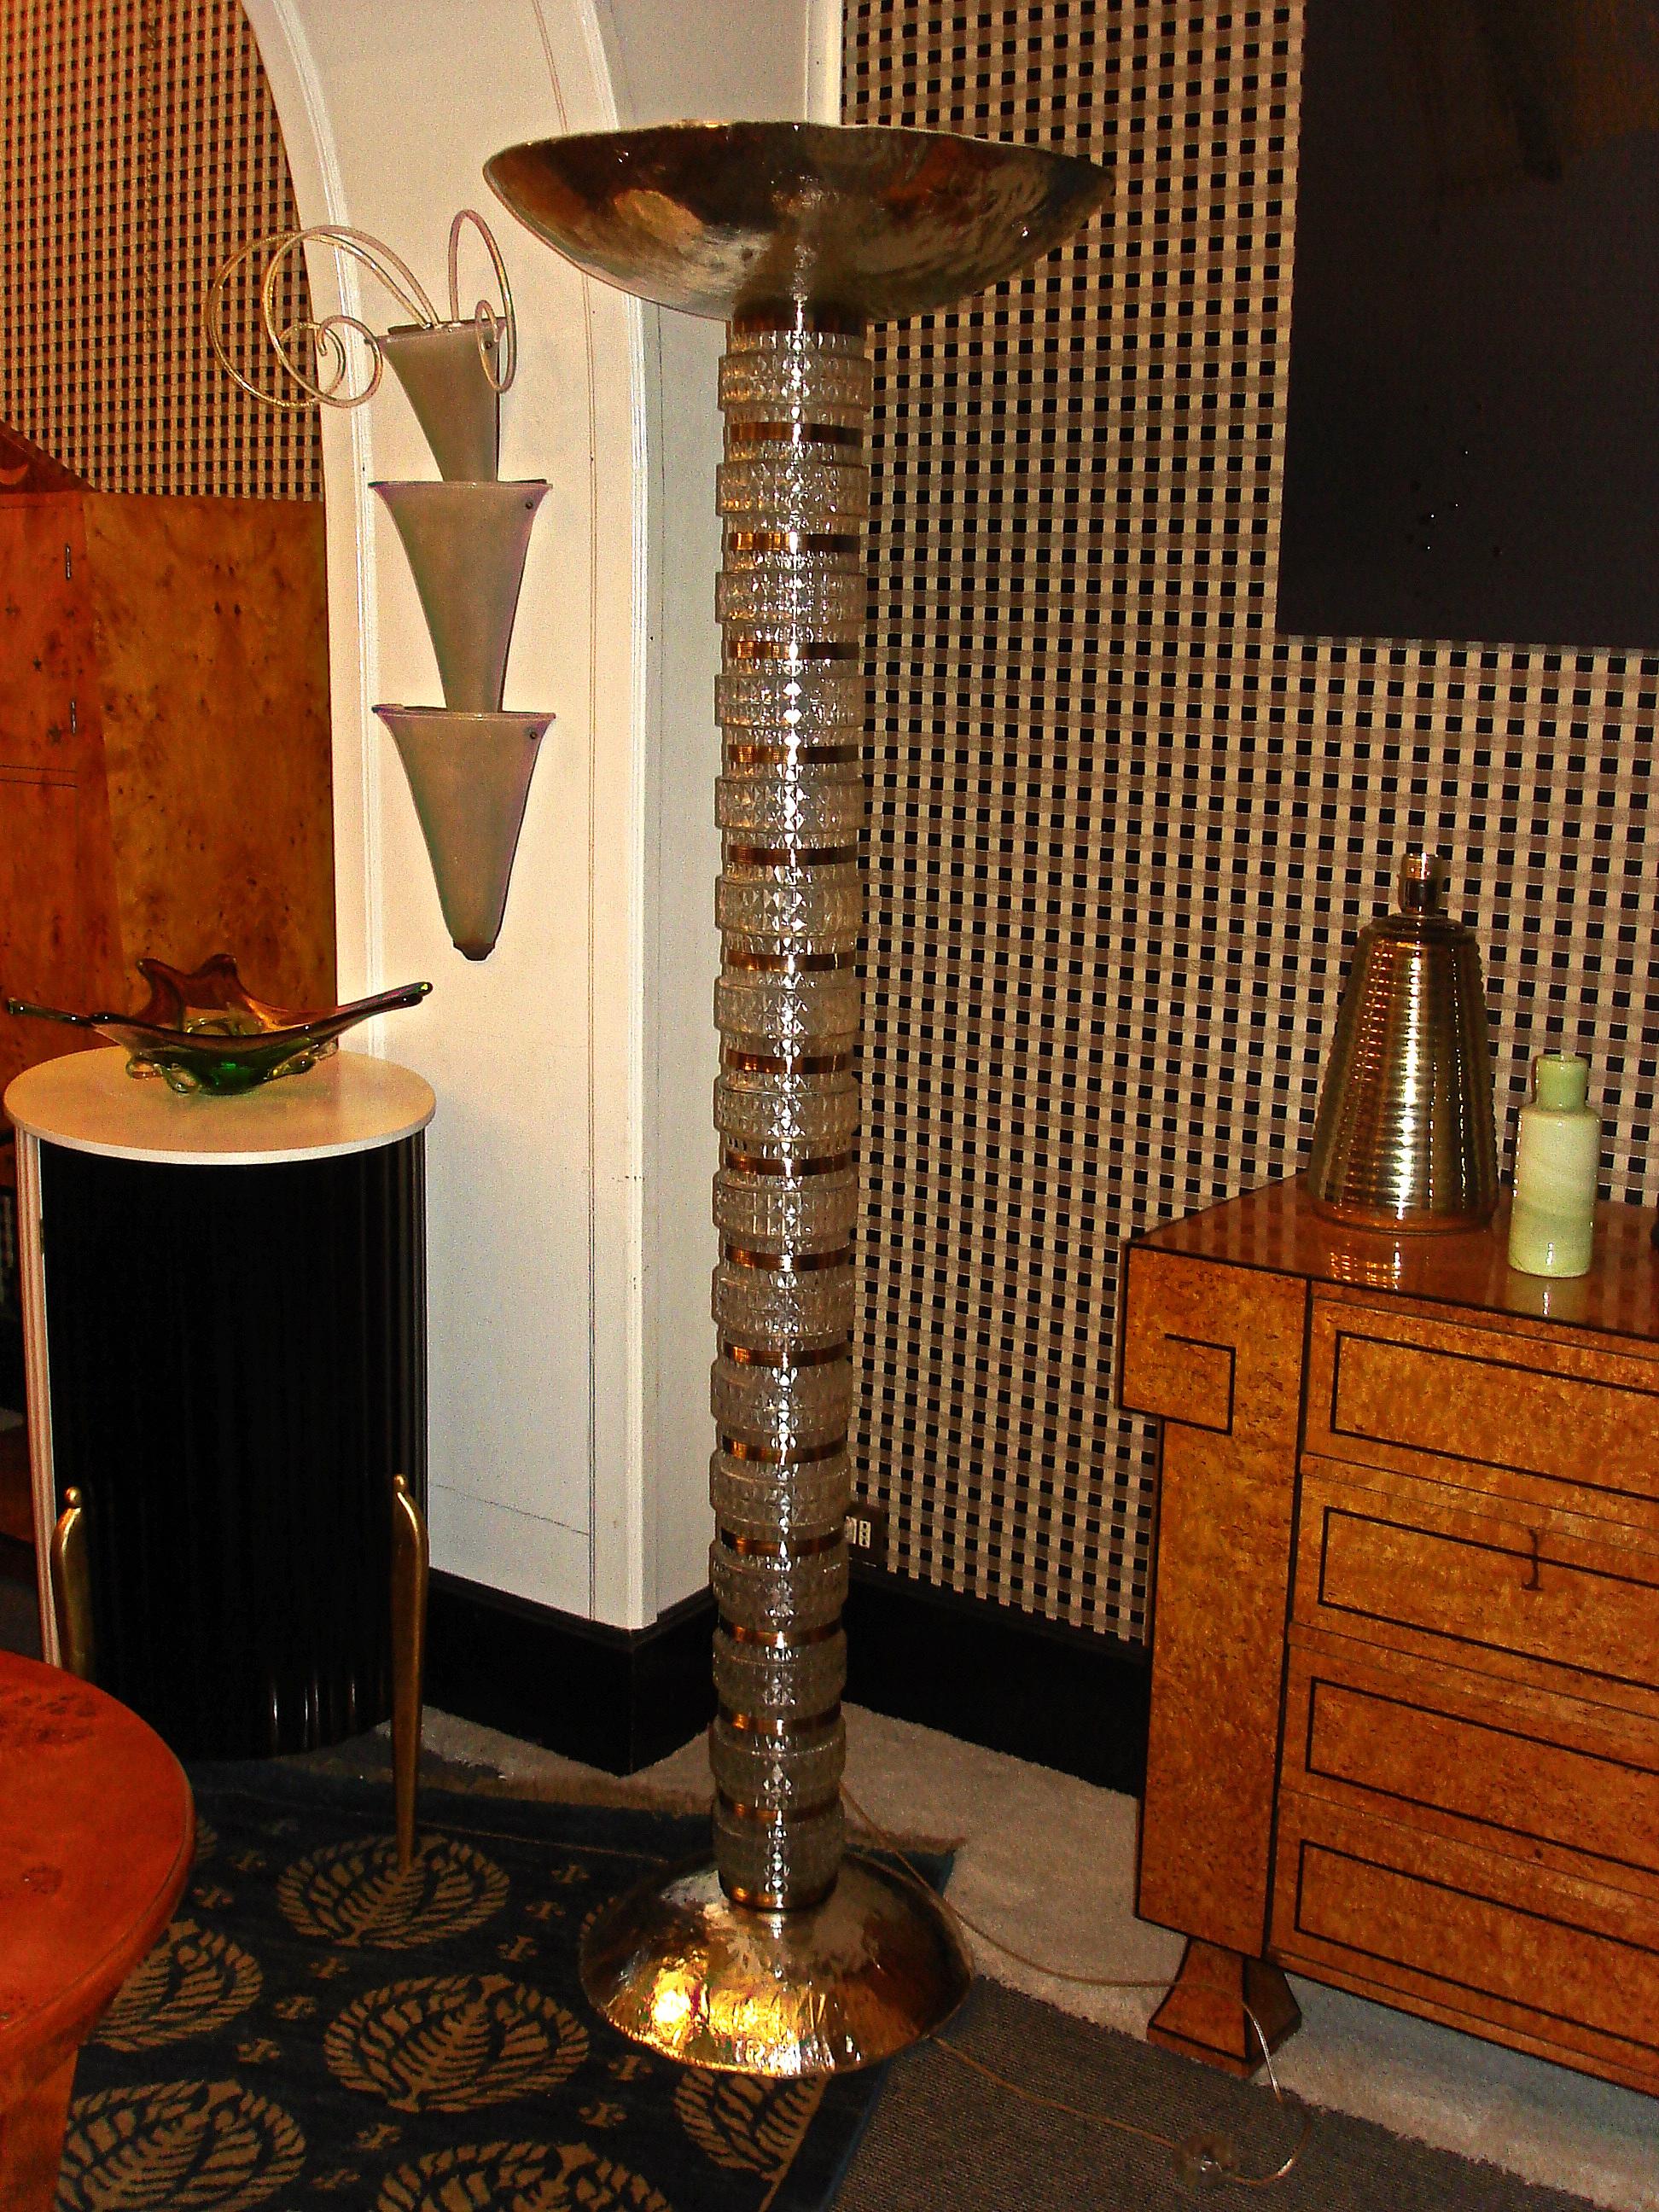 Brilliant floor lamp made of Murano glass. 

Formed by two mirrored glass cups, a small one as a base and a larger one placed on top containing four-lights. The central body is made up of glass cylinders alternating with the chromed metal parts.